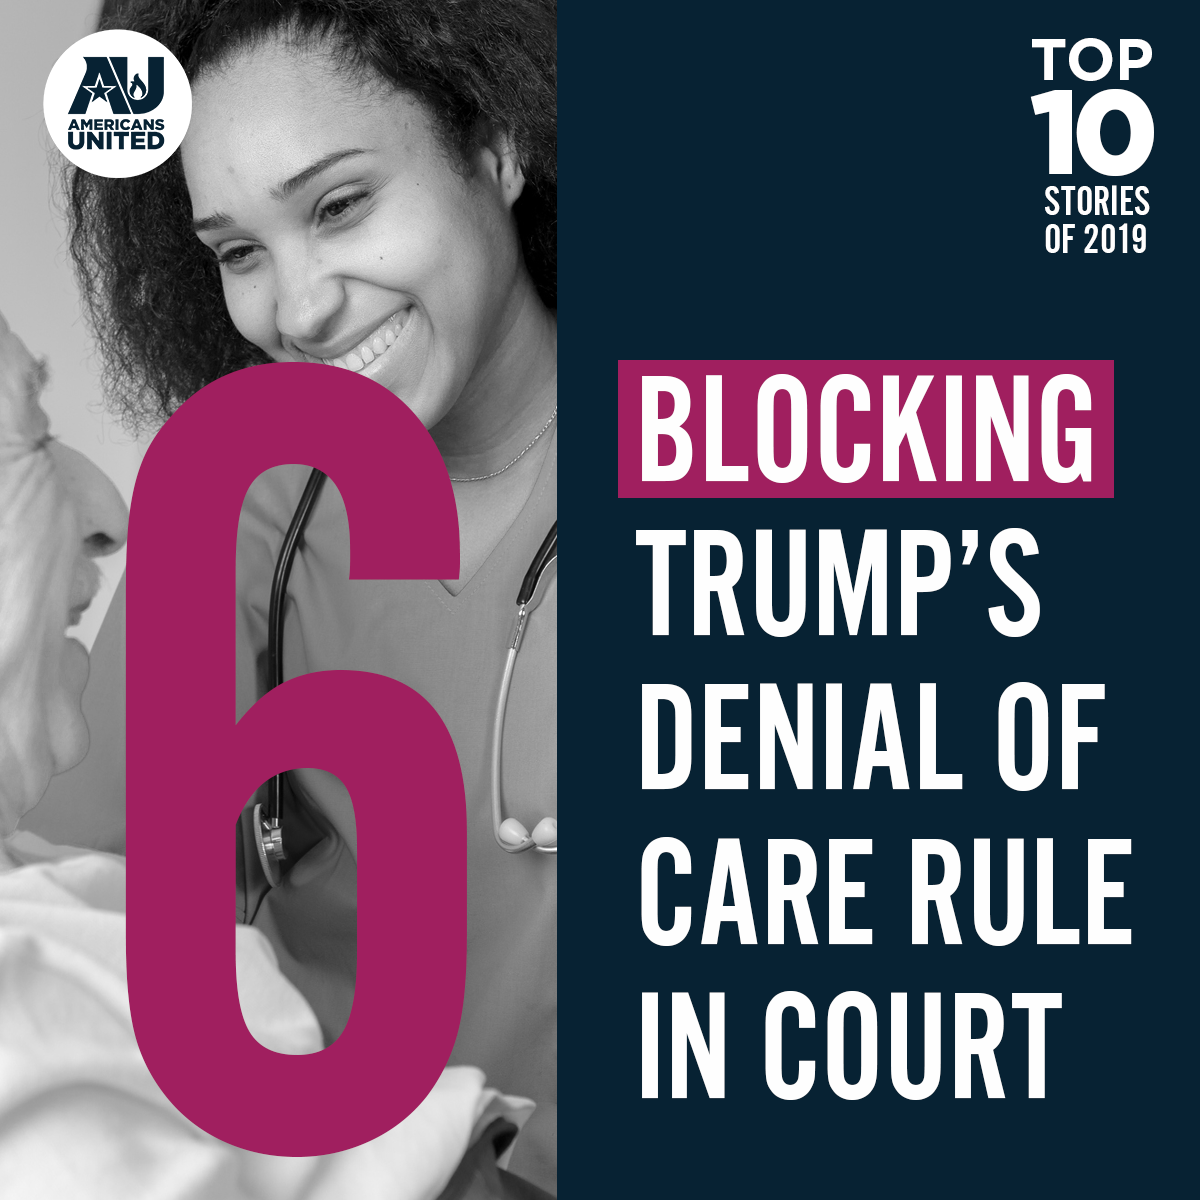 No. 6 Blocking Trump's Denial of Care Rule in Court